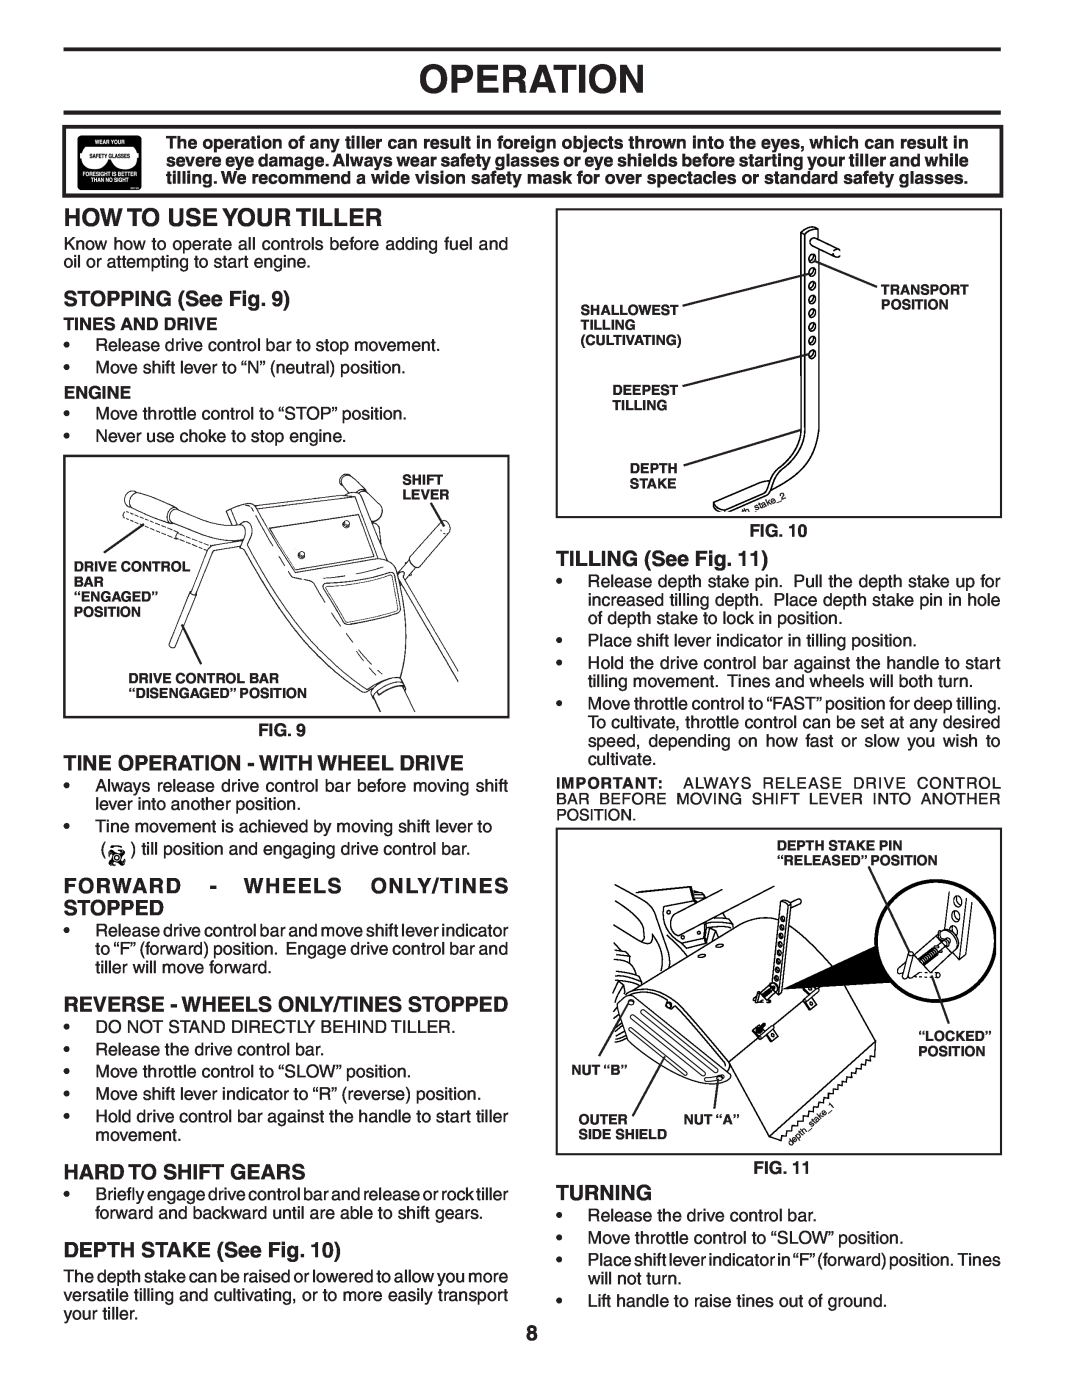 Poulan 96092000400 manual How To Use Your Tiller, STOPPING See Fig, Tine Operation - With Wheel Drive, Hard To Shift Gears 